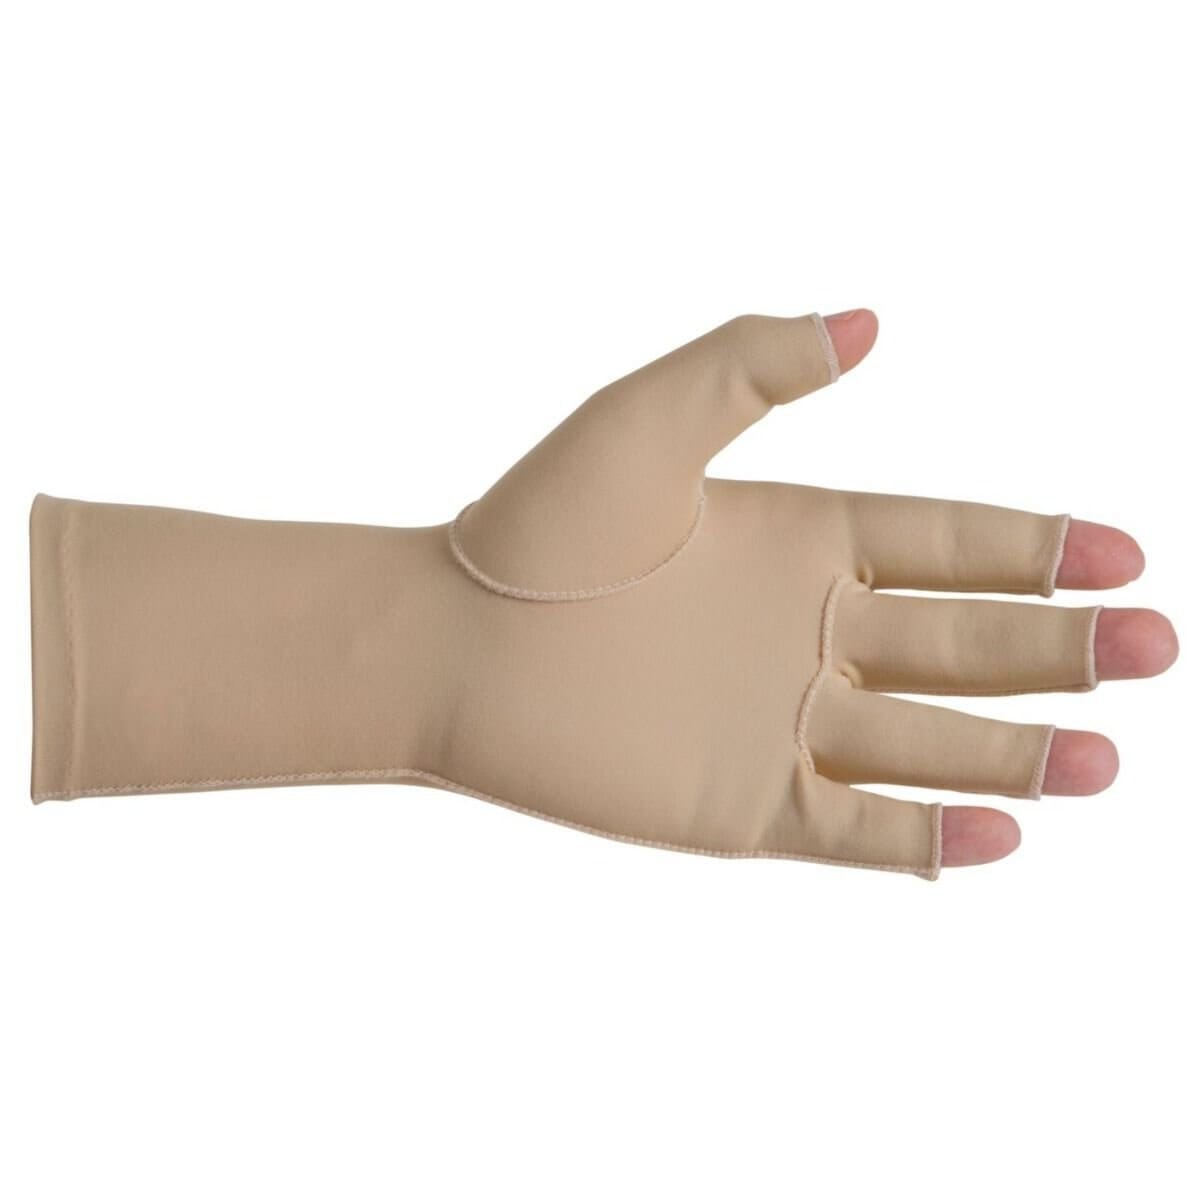 View Compression Hatch Oedema Glove Open Finger Left Extra Small information